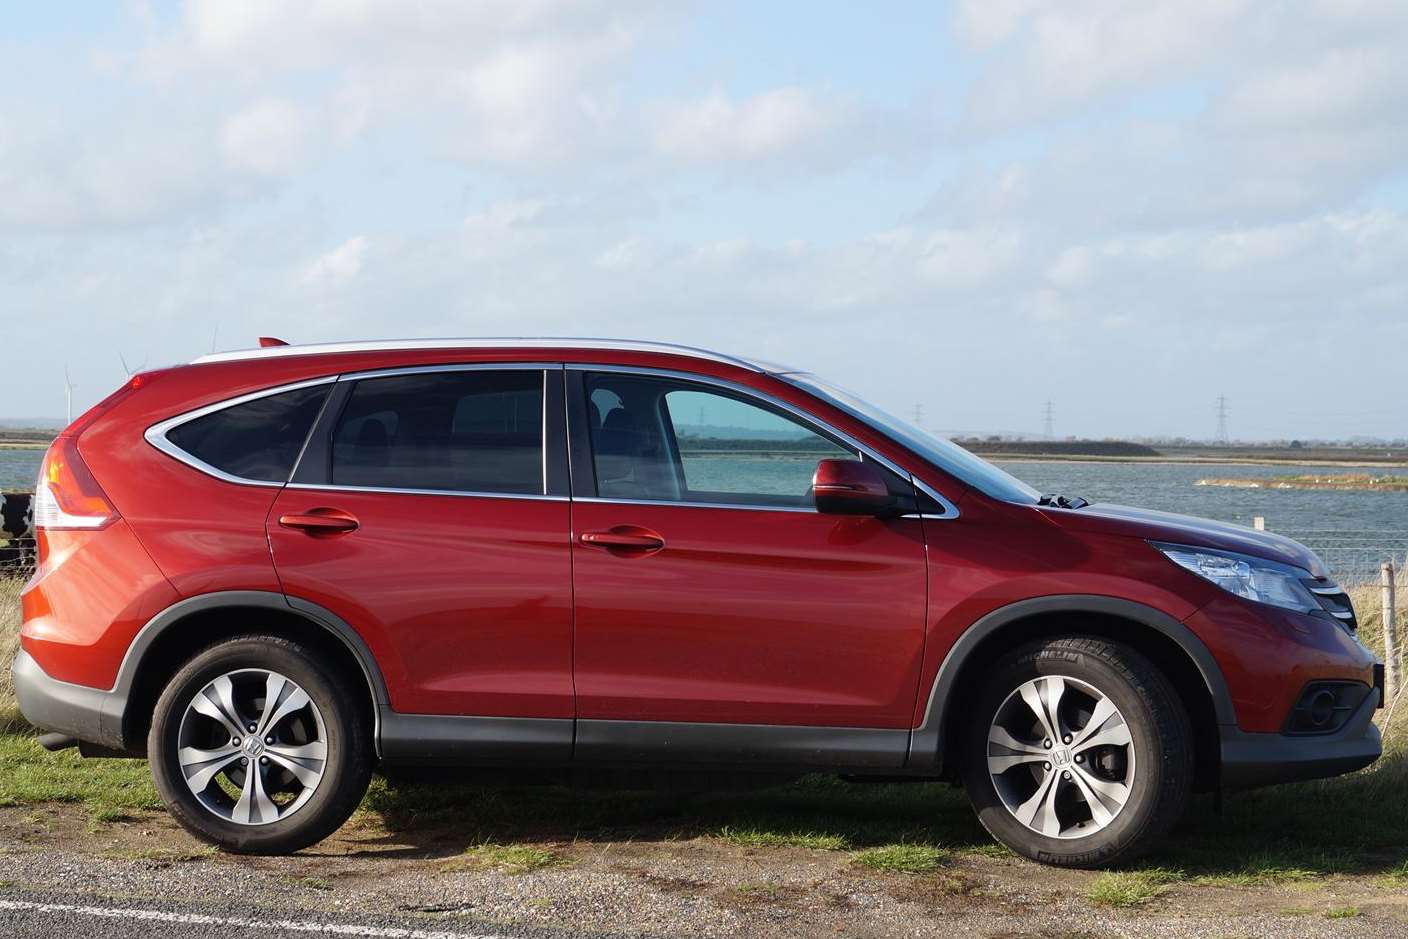 Honda's designers have cleverly disguised the size of the CR-V